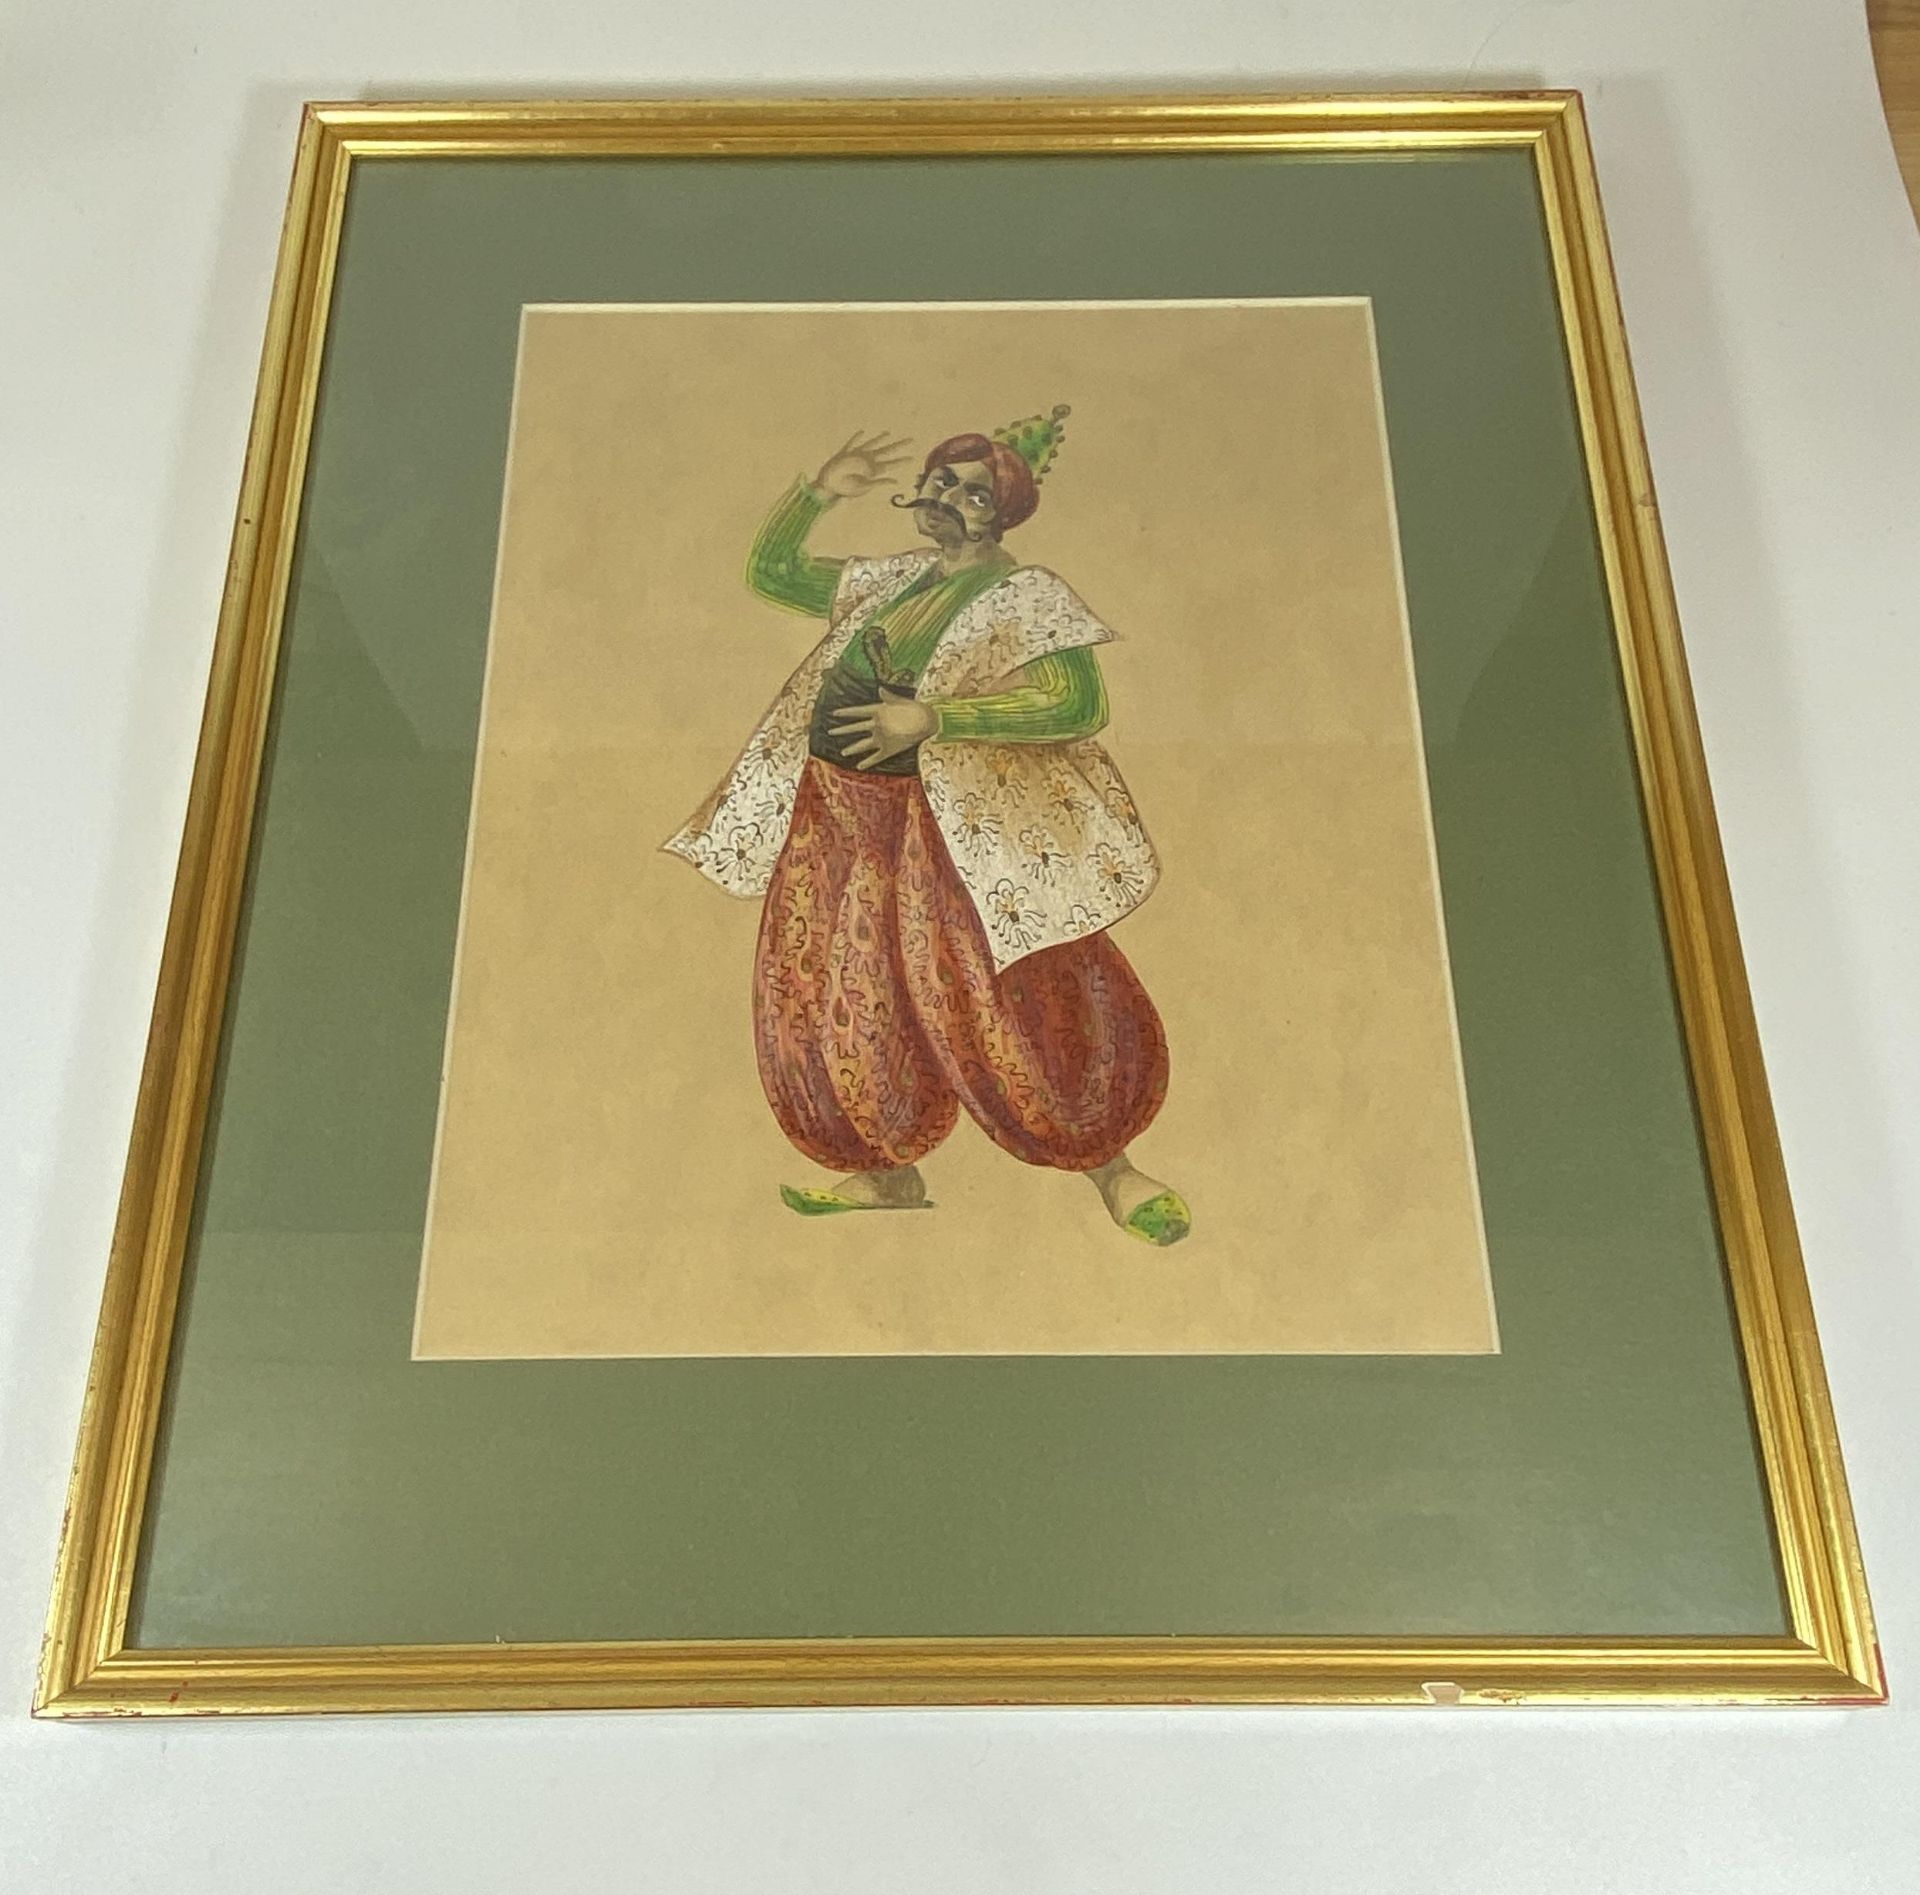 A GILT FRAMED WATERCOLOUR OF A MAN, LABEL TO REVERSE 'MOZART: II SERAGLIO, OSARUN, KEEPER OF THE